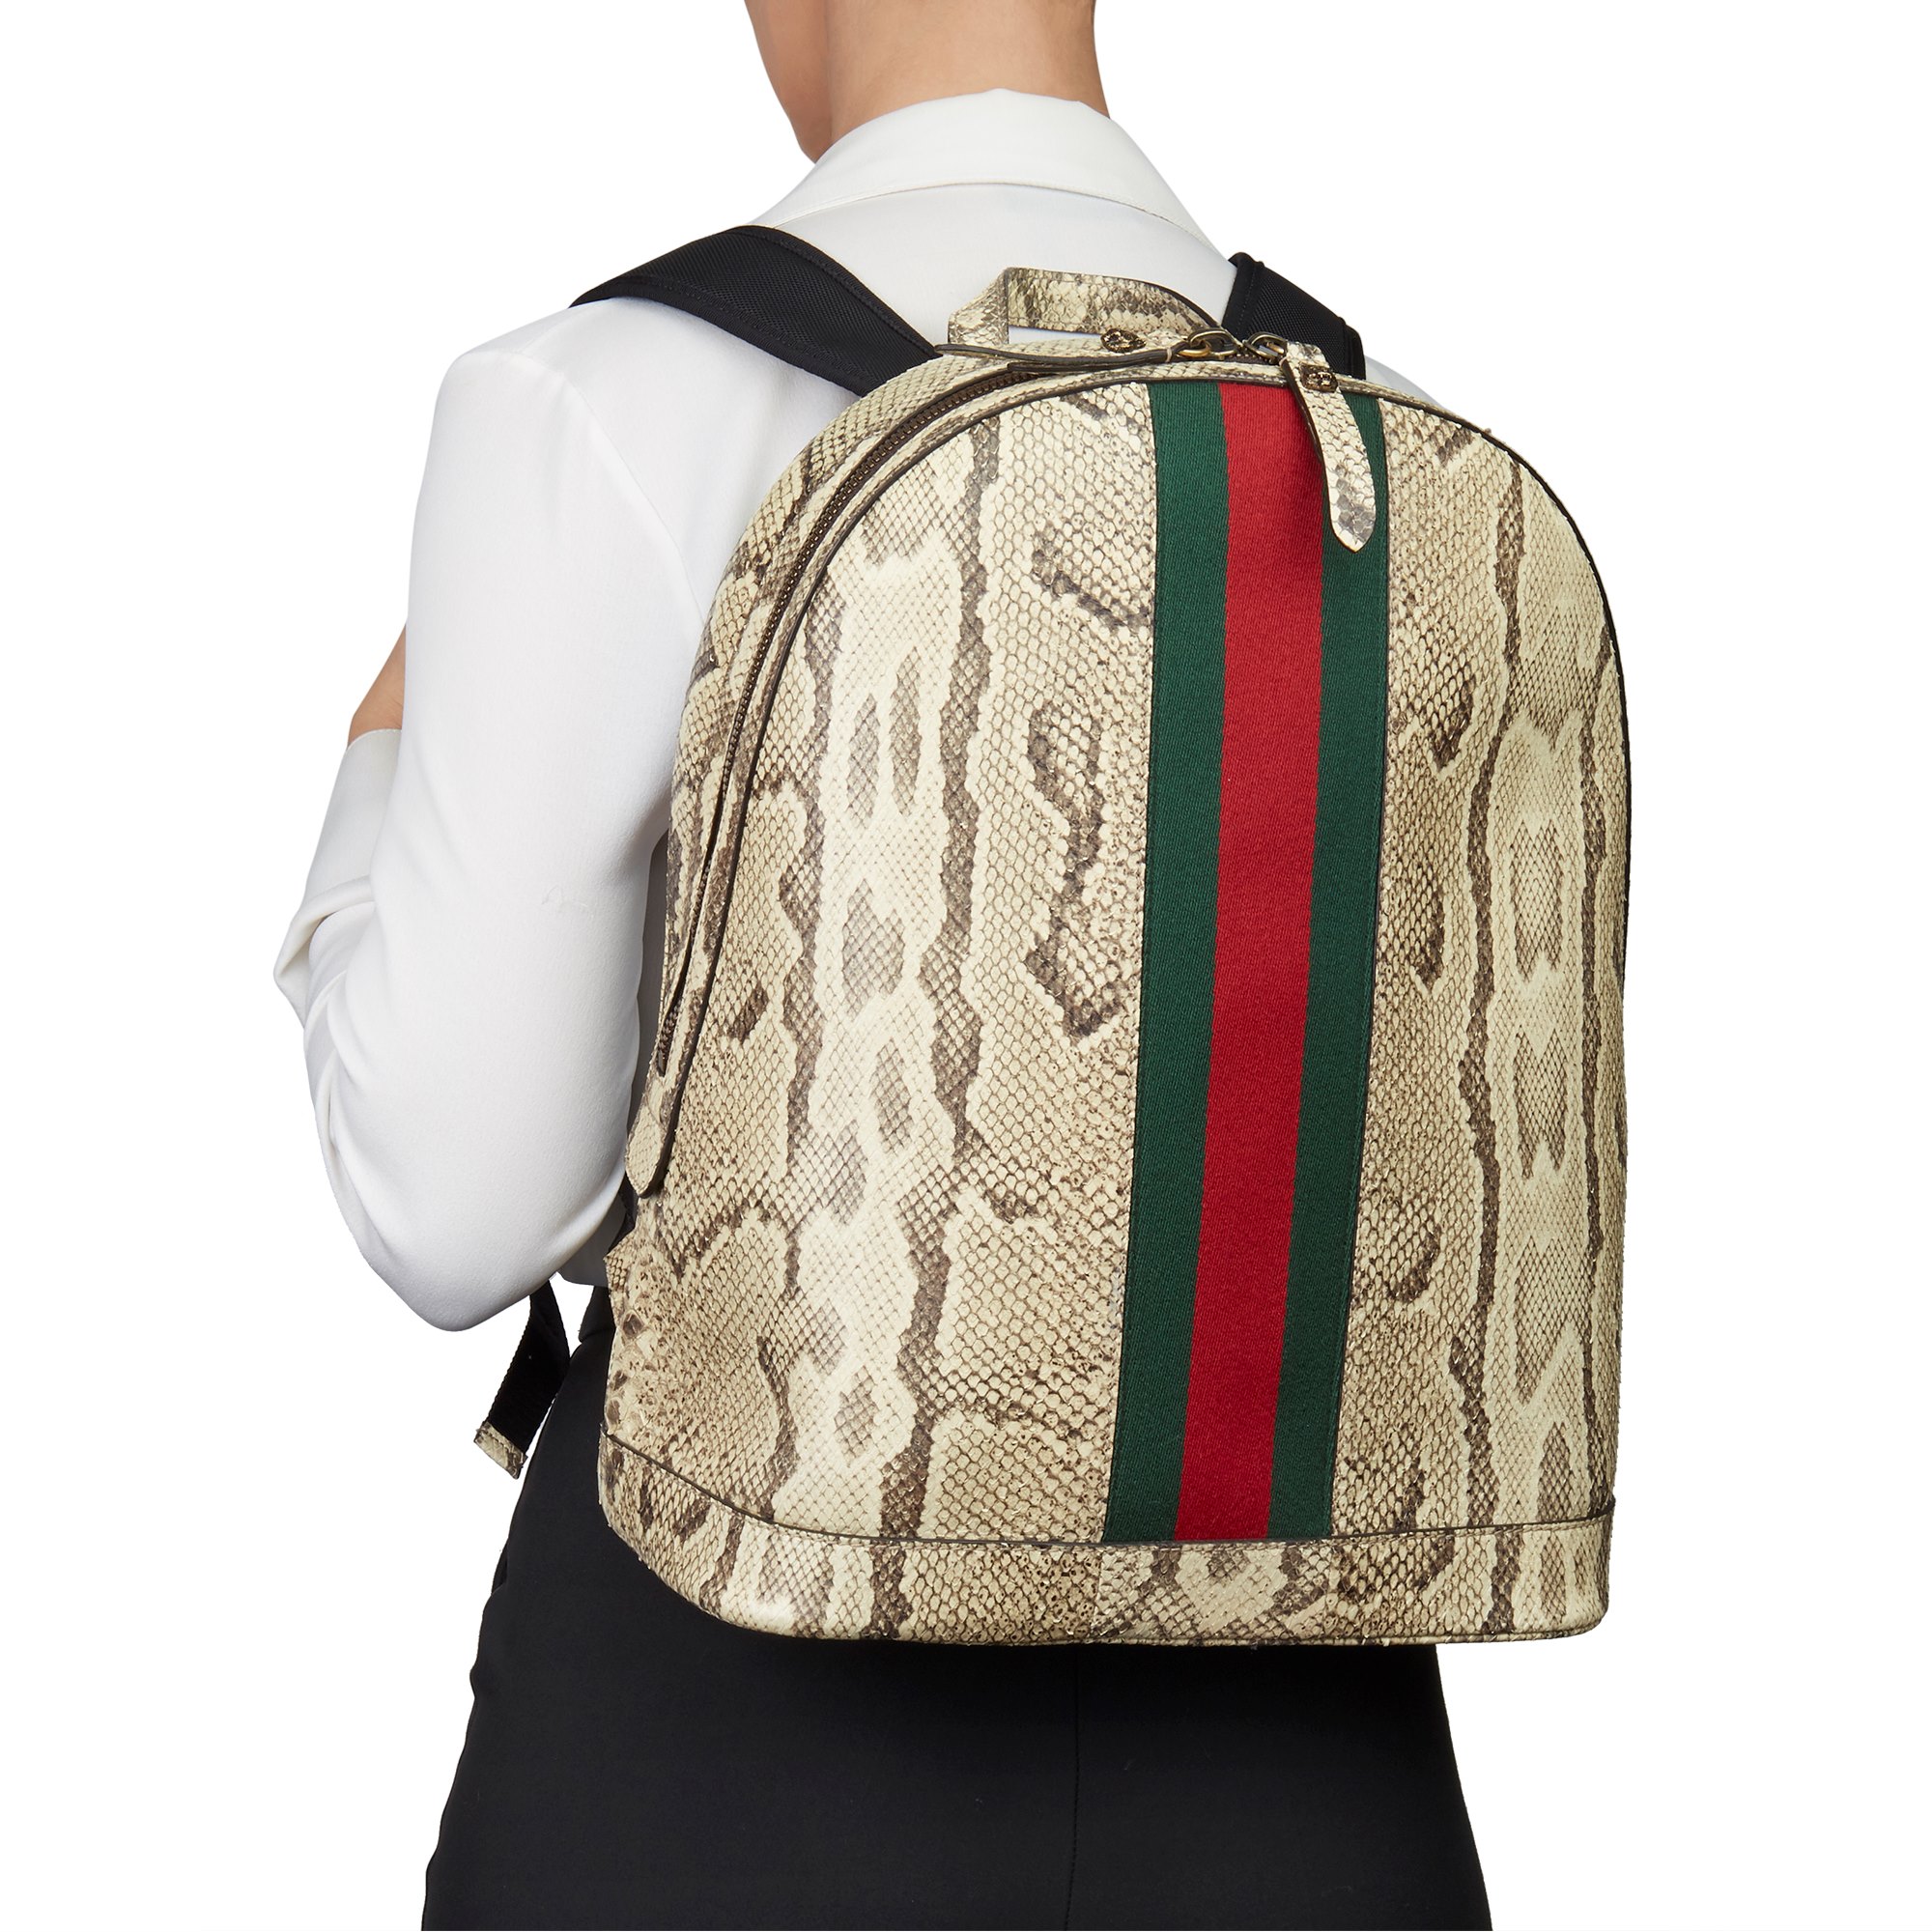 second hand gucci backpack